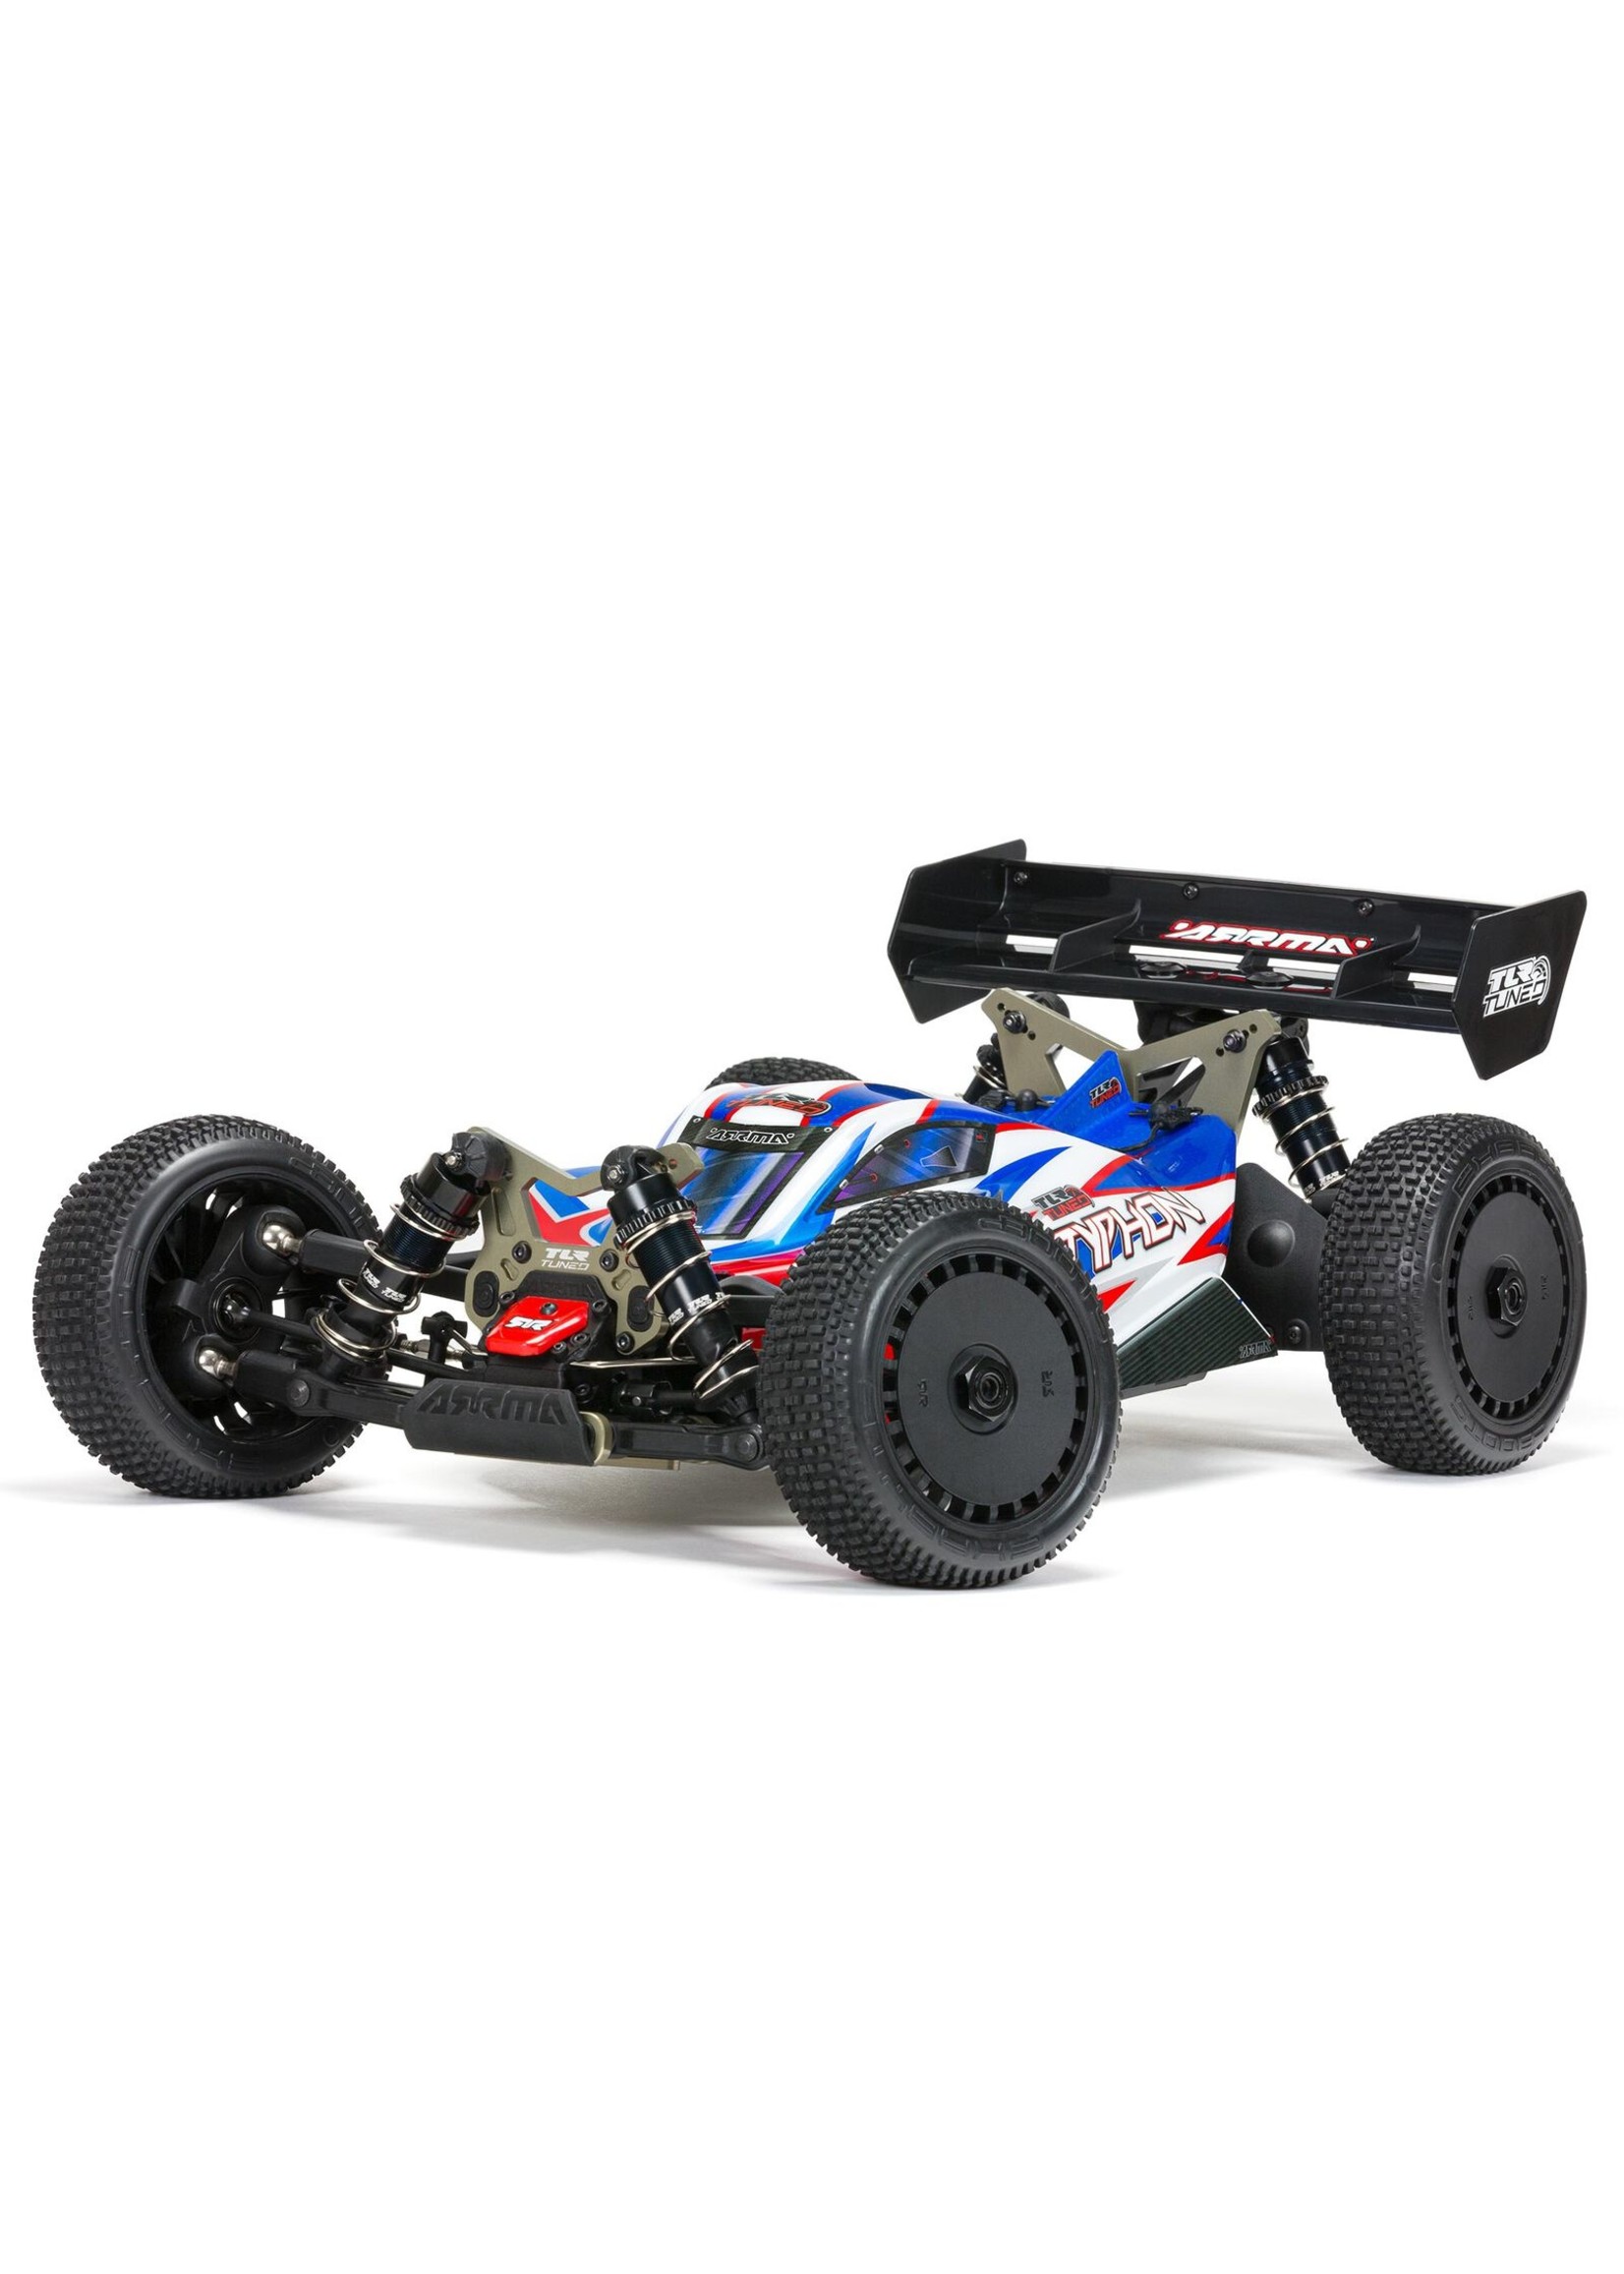 Arrma 1/8 TLR Tuned Typhon 6S 4WD BLX 1: Buggy, RTR - Red/Blue